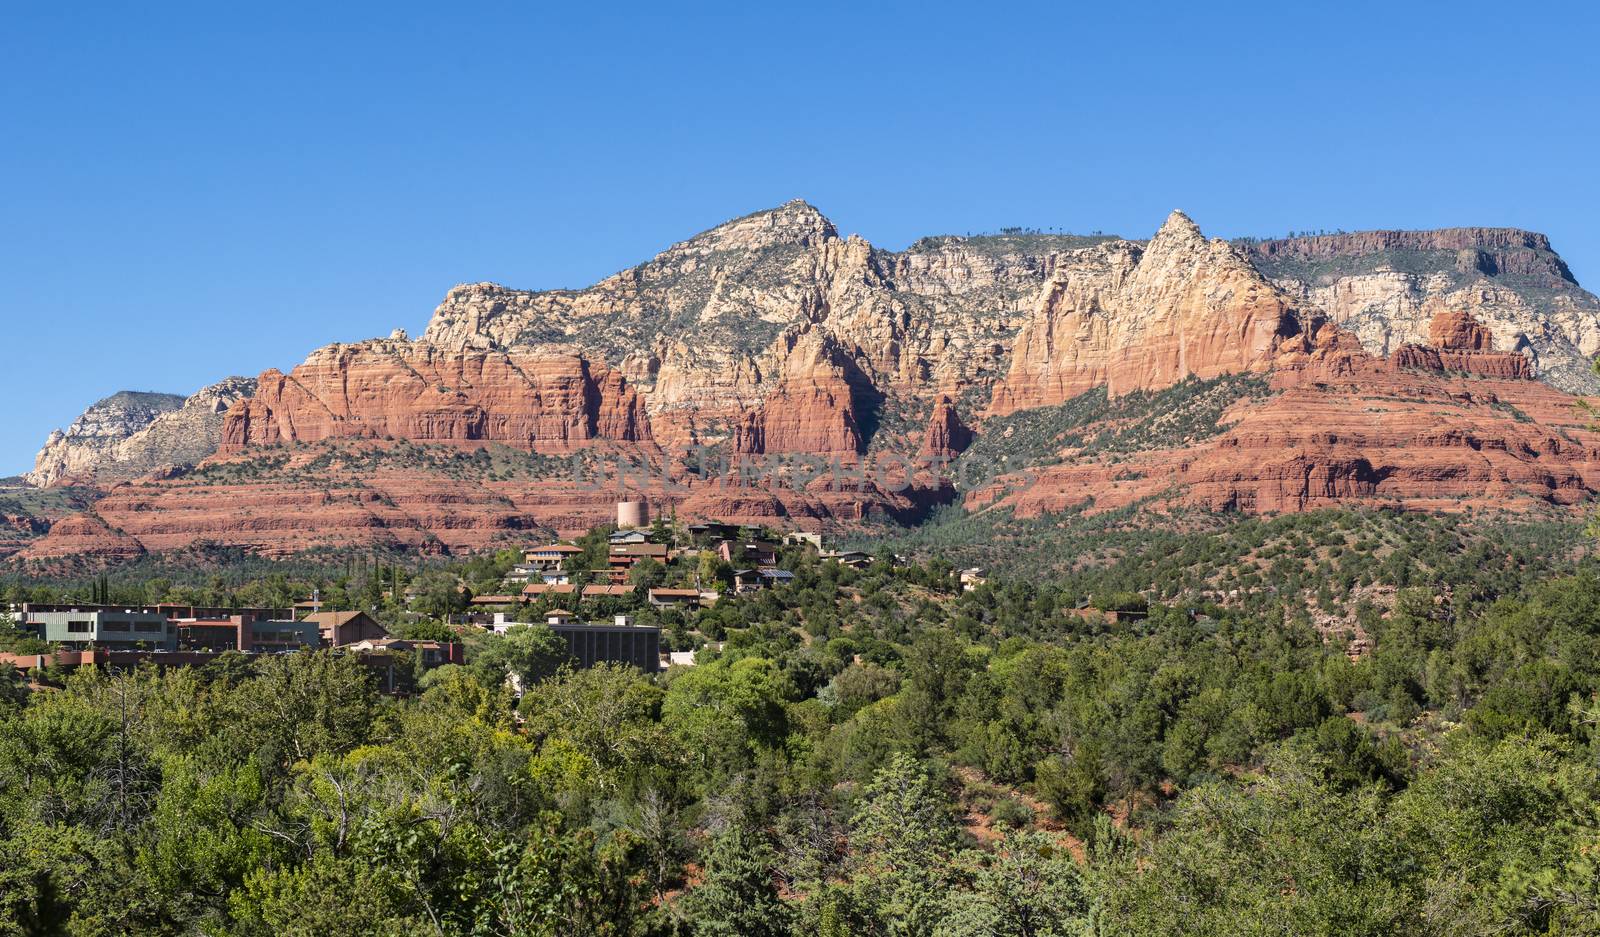 View from Schnebly Hill Road in Sedona, Arizona by Njean